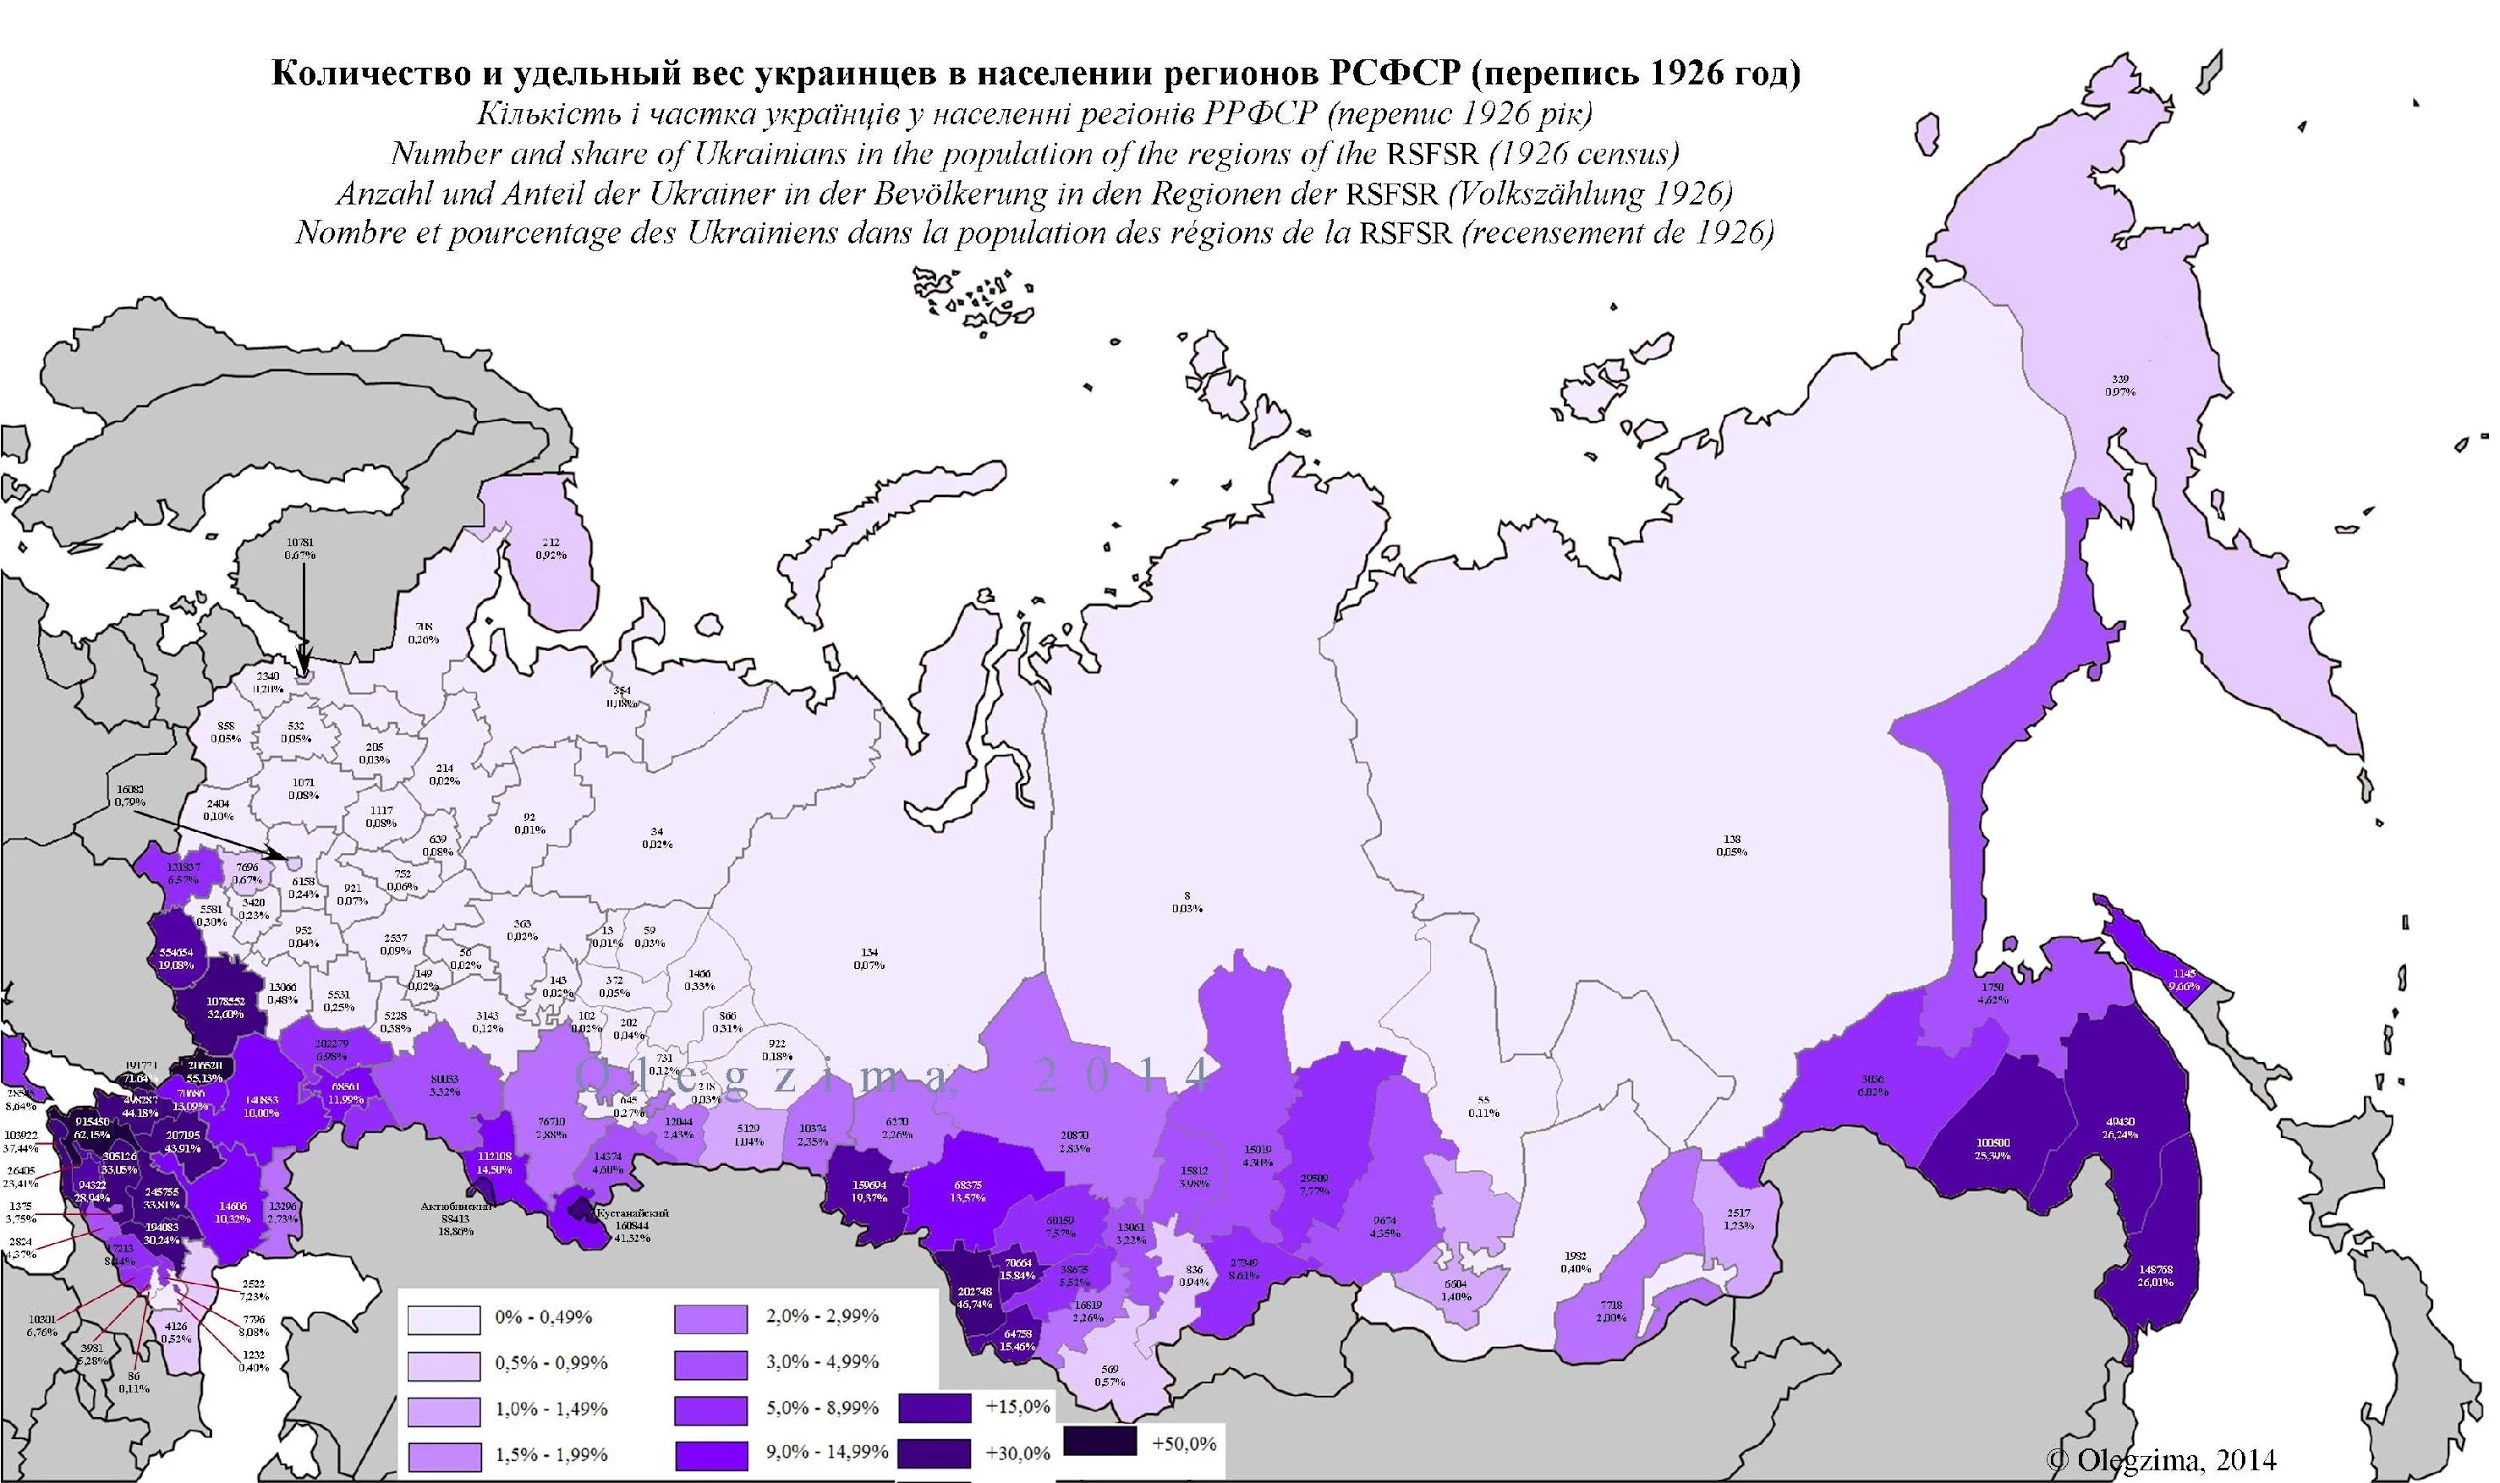 Number and share of Ukrainians in the population of the regions of the Russian Soviet Federative Socialist Republic, according to the 1926 Soviet census. Graph by Olegzima, Wikimedia Commons.